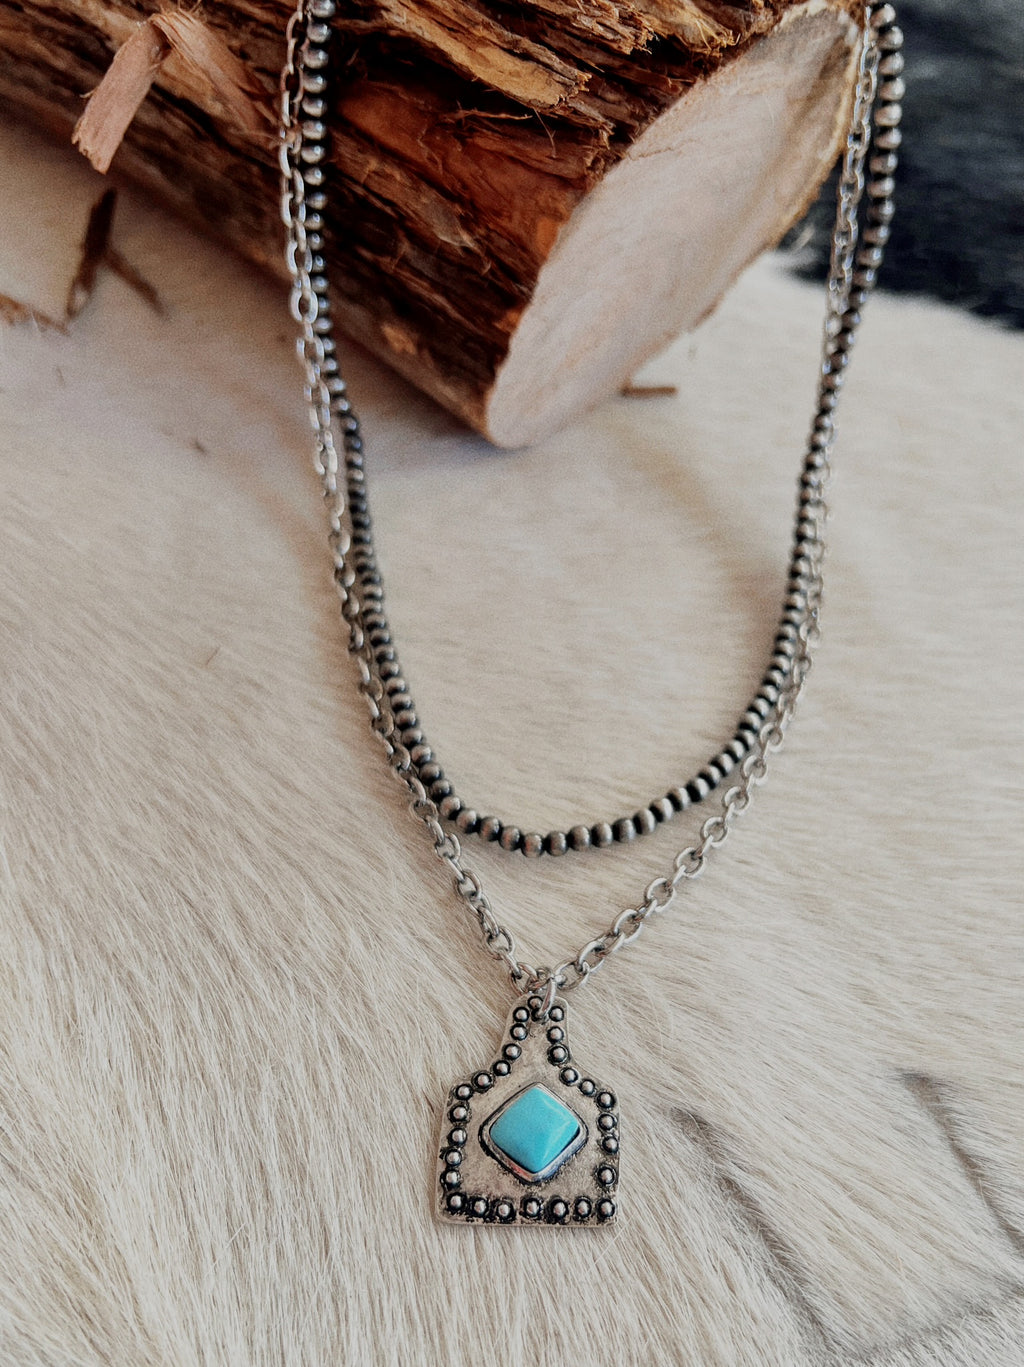 Tagged in Turquoise Necklace